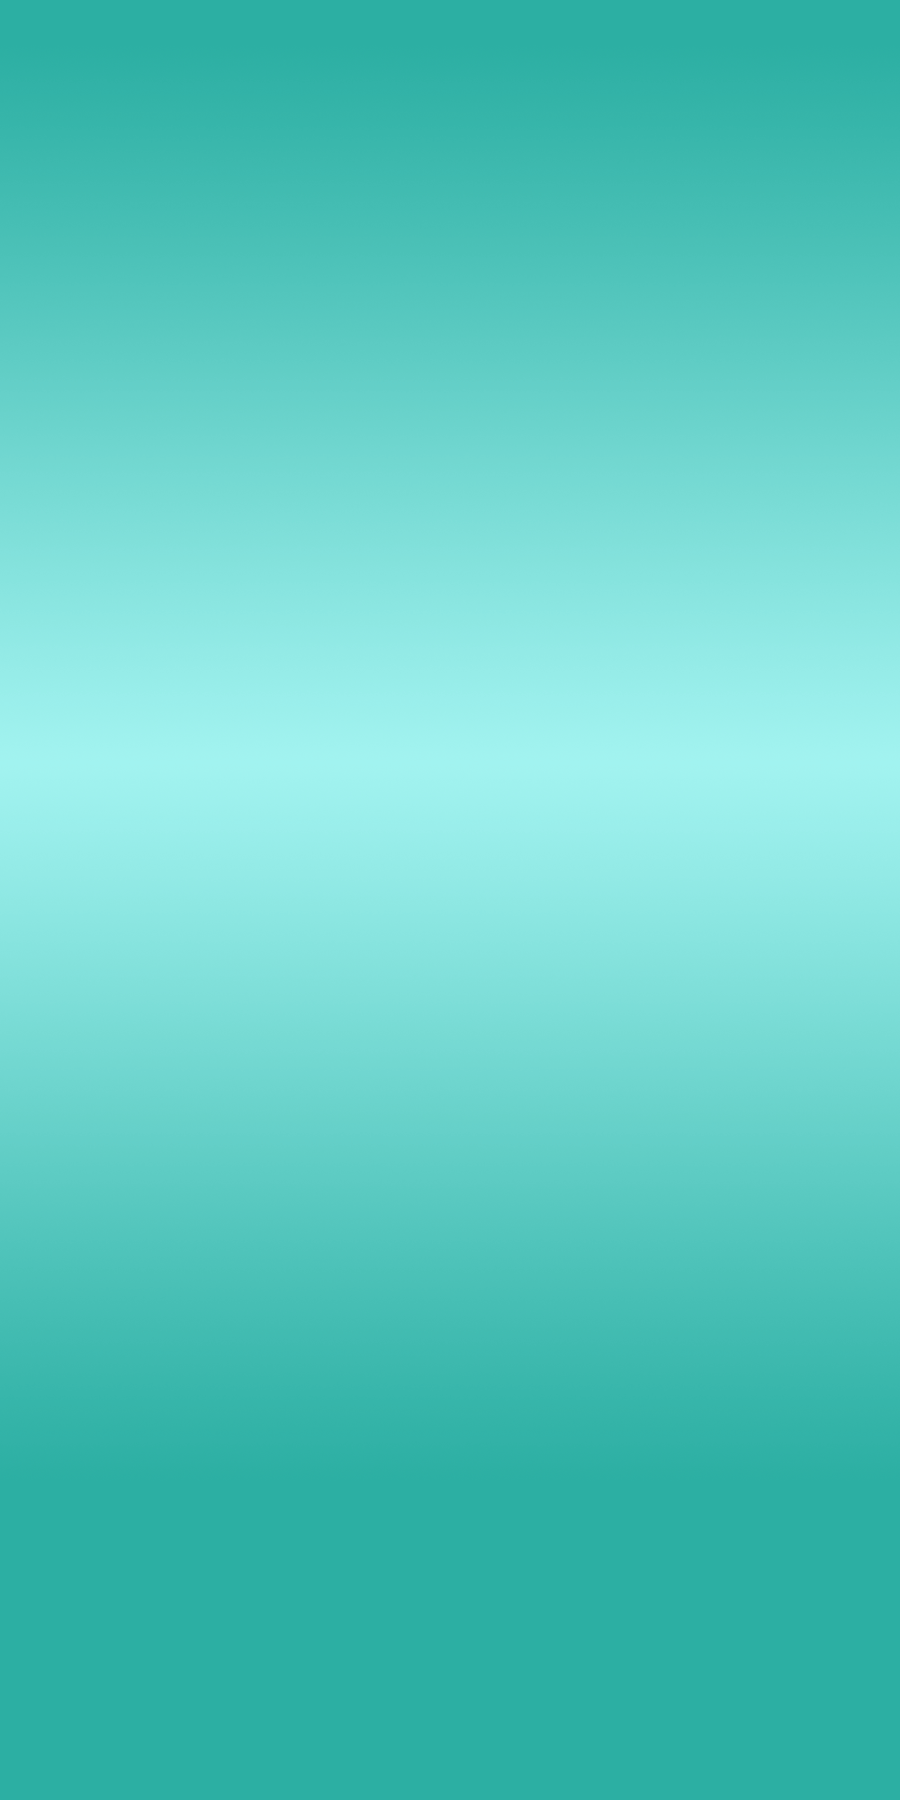 Teal Background By Daydreamings